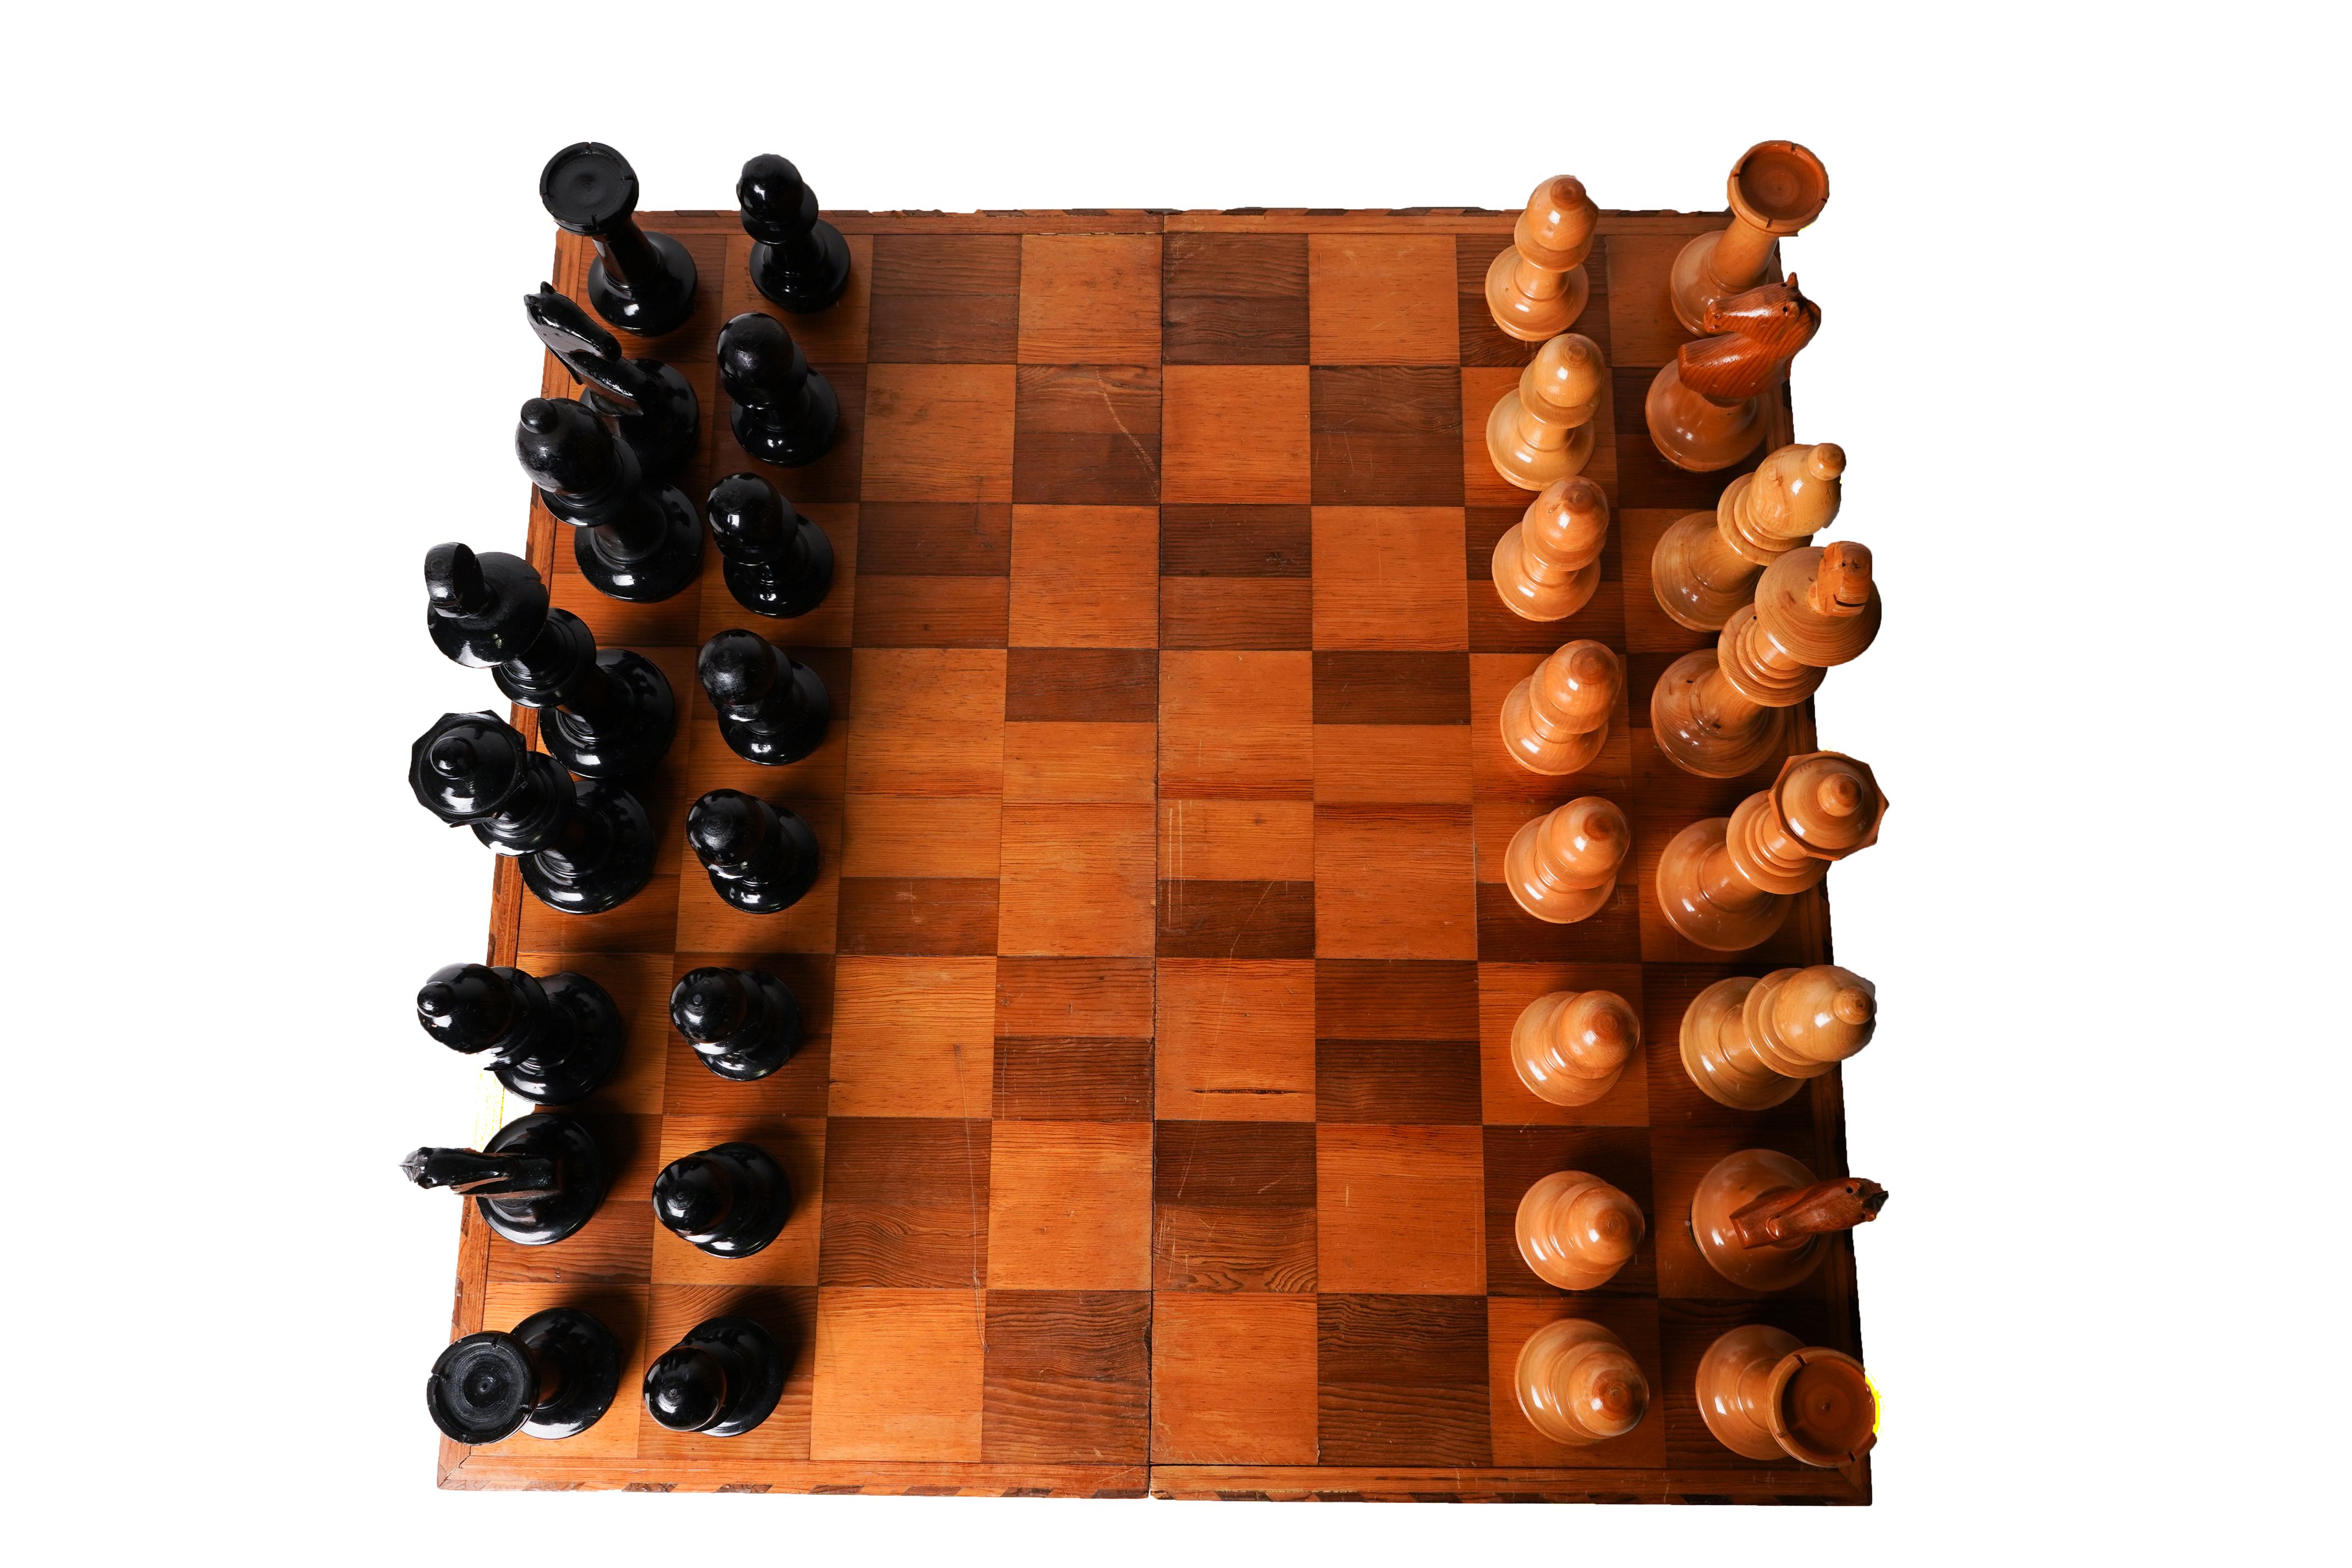 This dramatically over-scaled chess set is made from poplar wood, covered in natural lacquer. The sturdy box provides storage for the pieces as well as a gameboard.